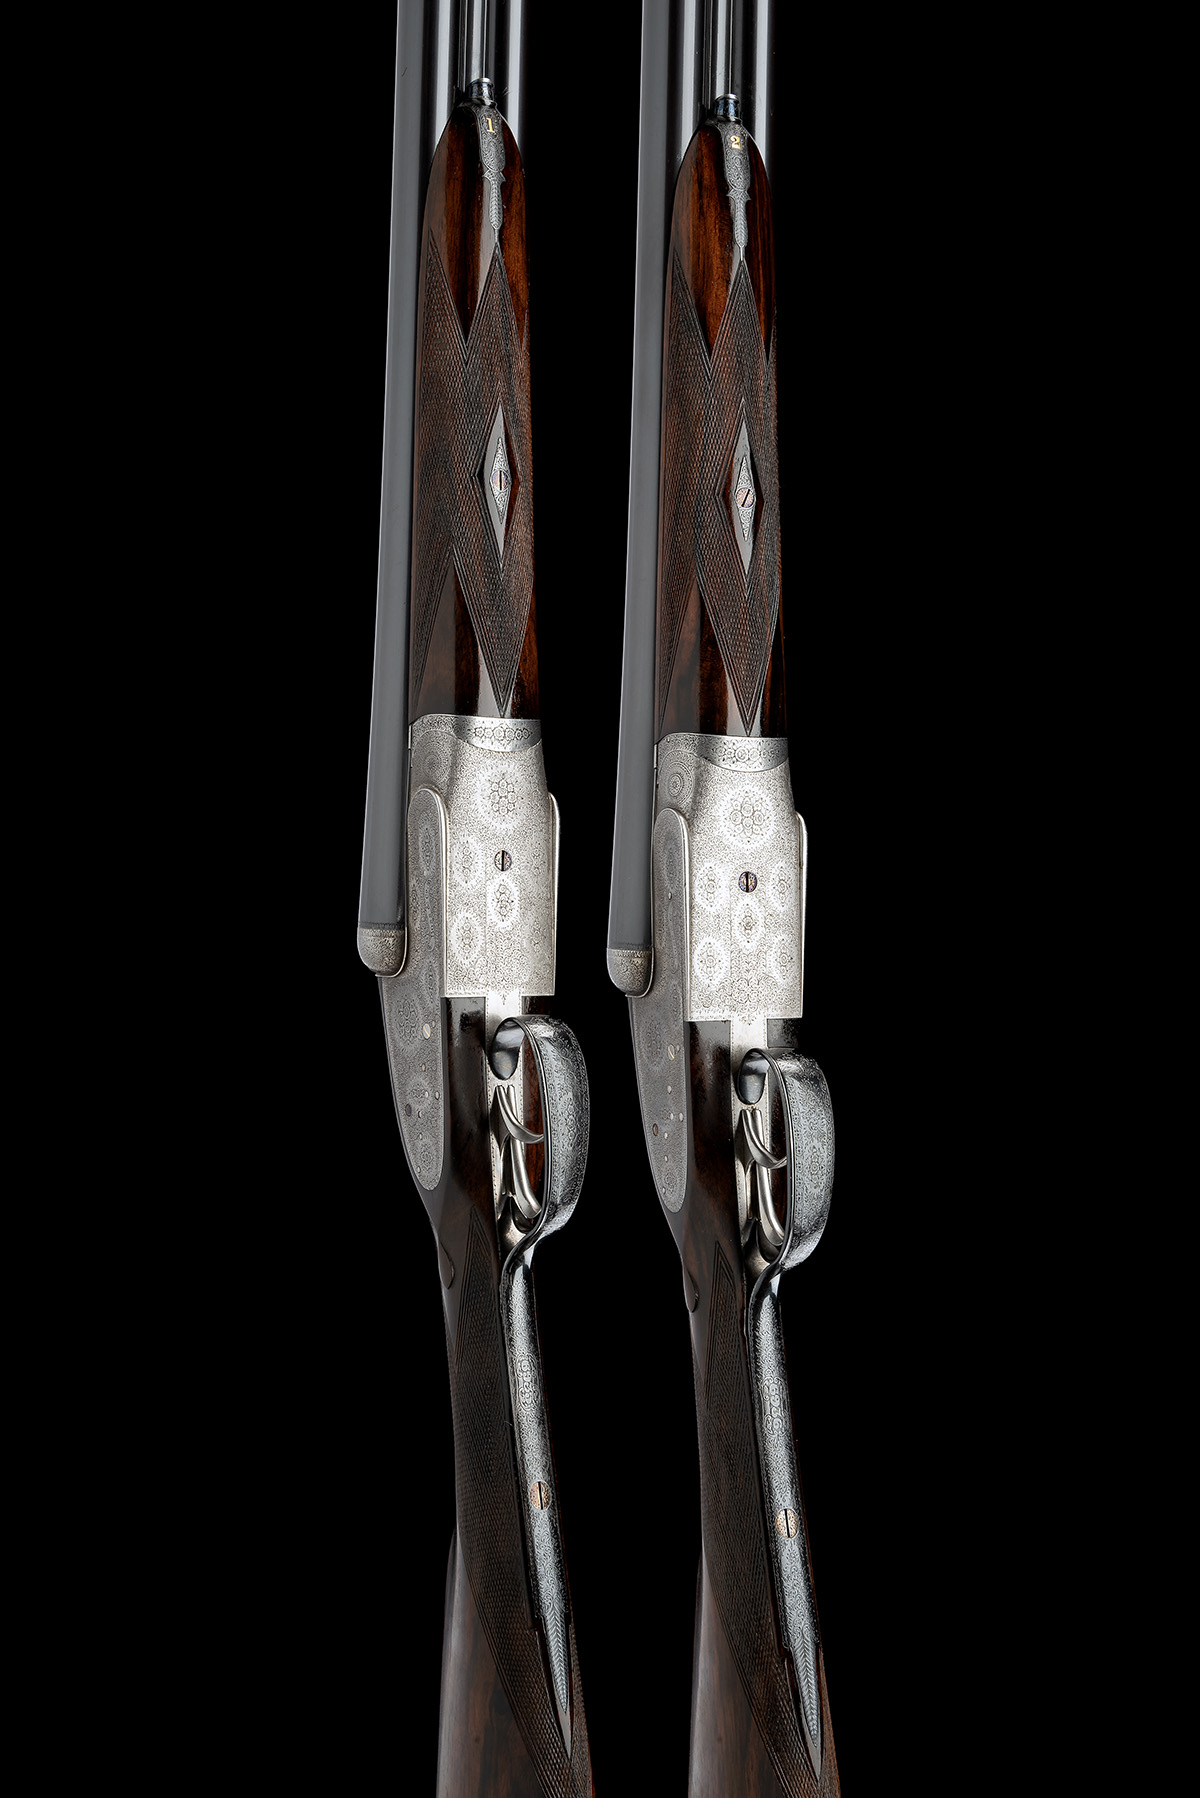 BOSS & CO. A PAIR OF 12-BORE EASY-OPENING SIDELOCK EJECTORS, serial no. 6935 / 6, circa 1922, - Image 3 of 11